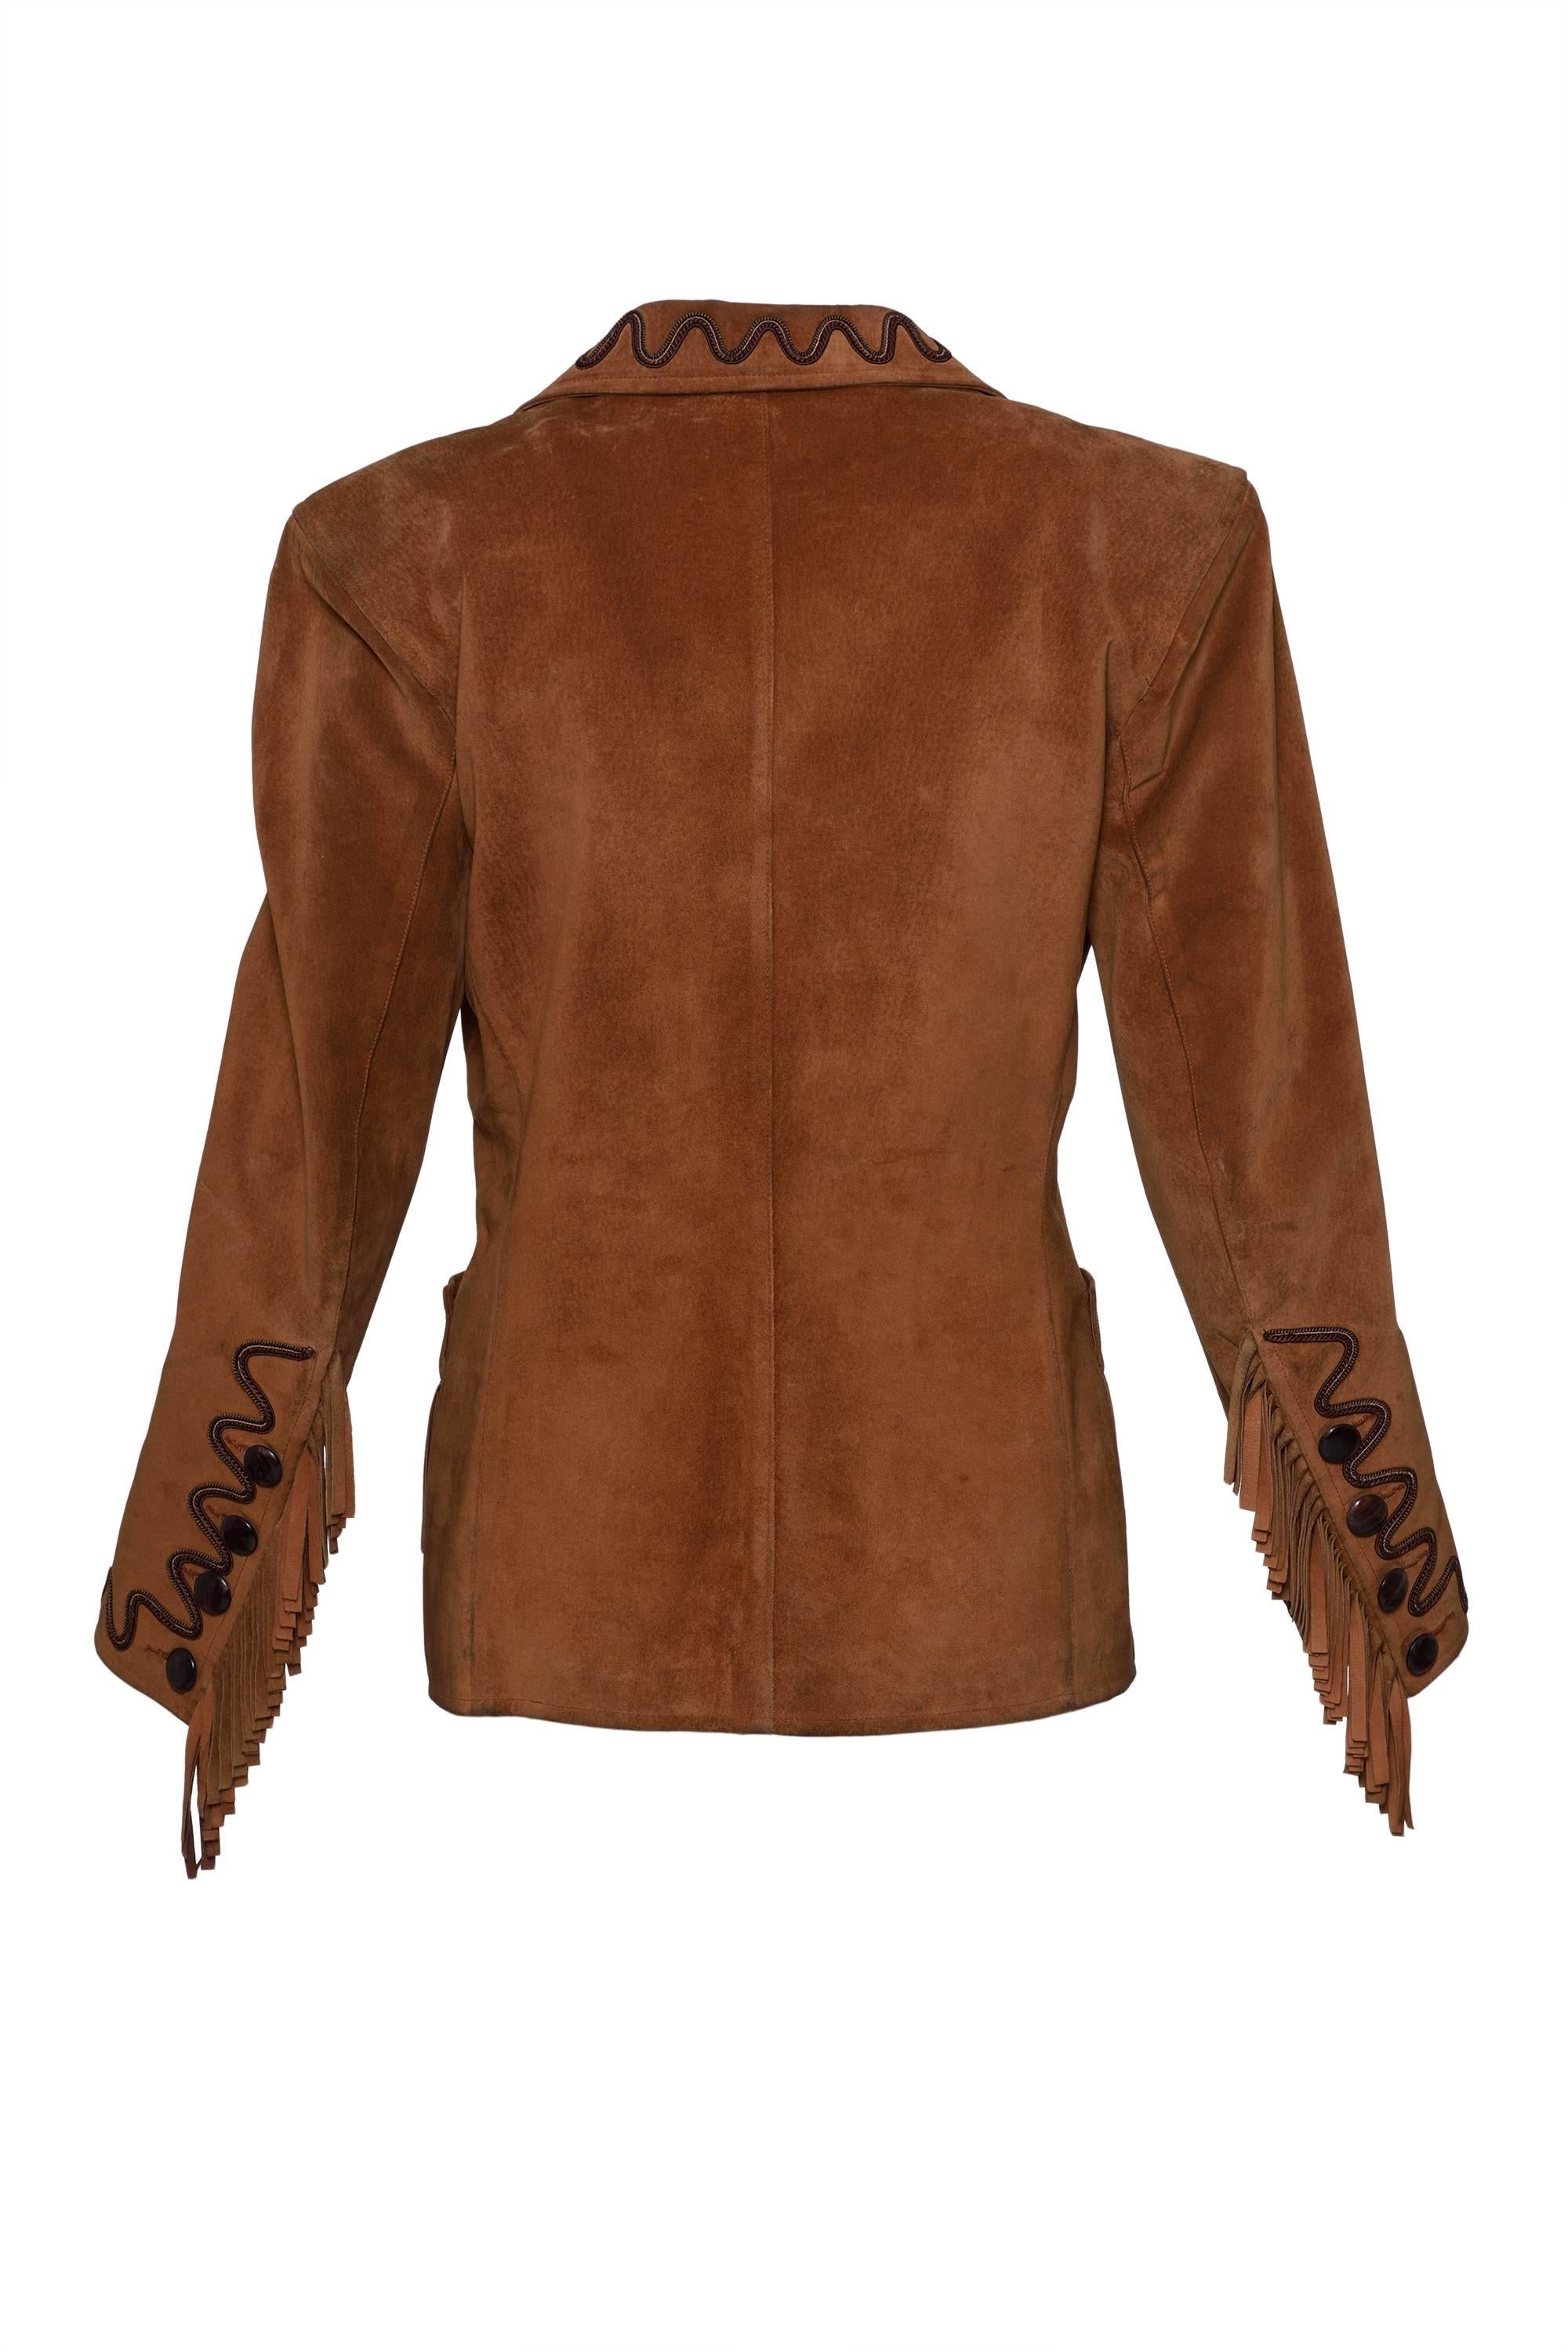 This lovely Yves Saint Laurent jacket is in a brown suede soft leather with trimming and fringe details. It has buttons frontal closure and pockets. It's fully satin lined.

Good condition 

Label: Yves Saint Laurent Rive Gauche - Made in